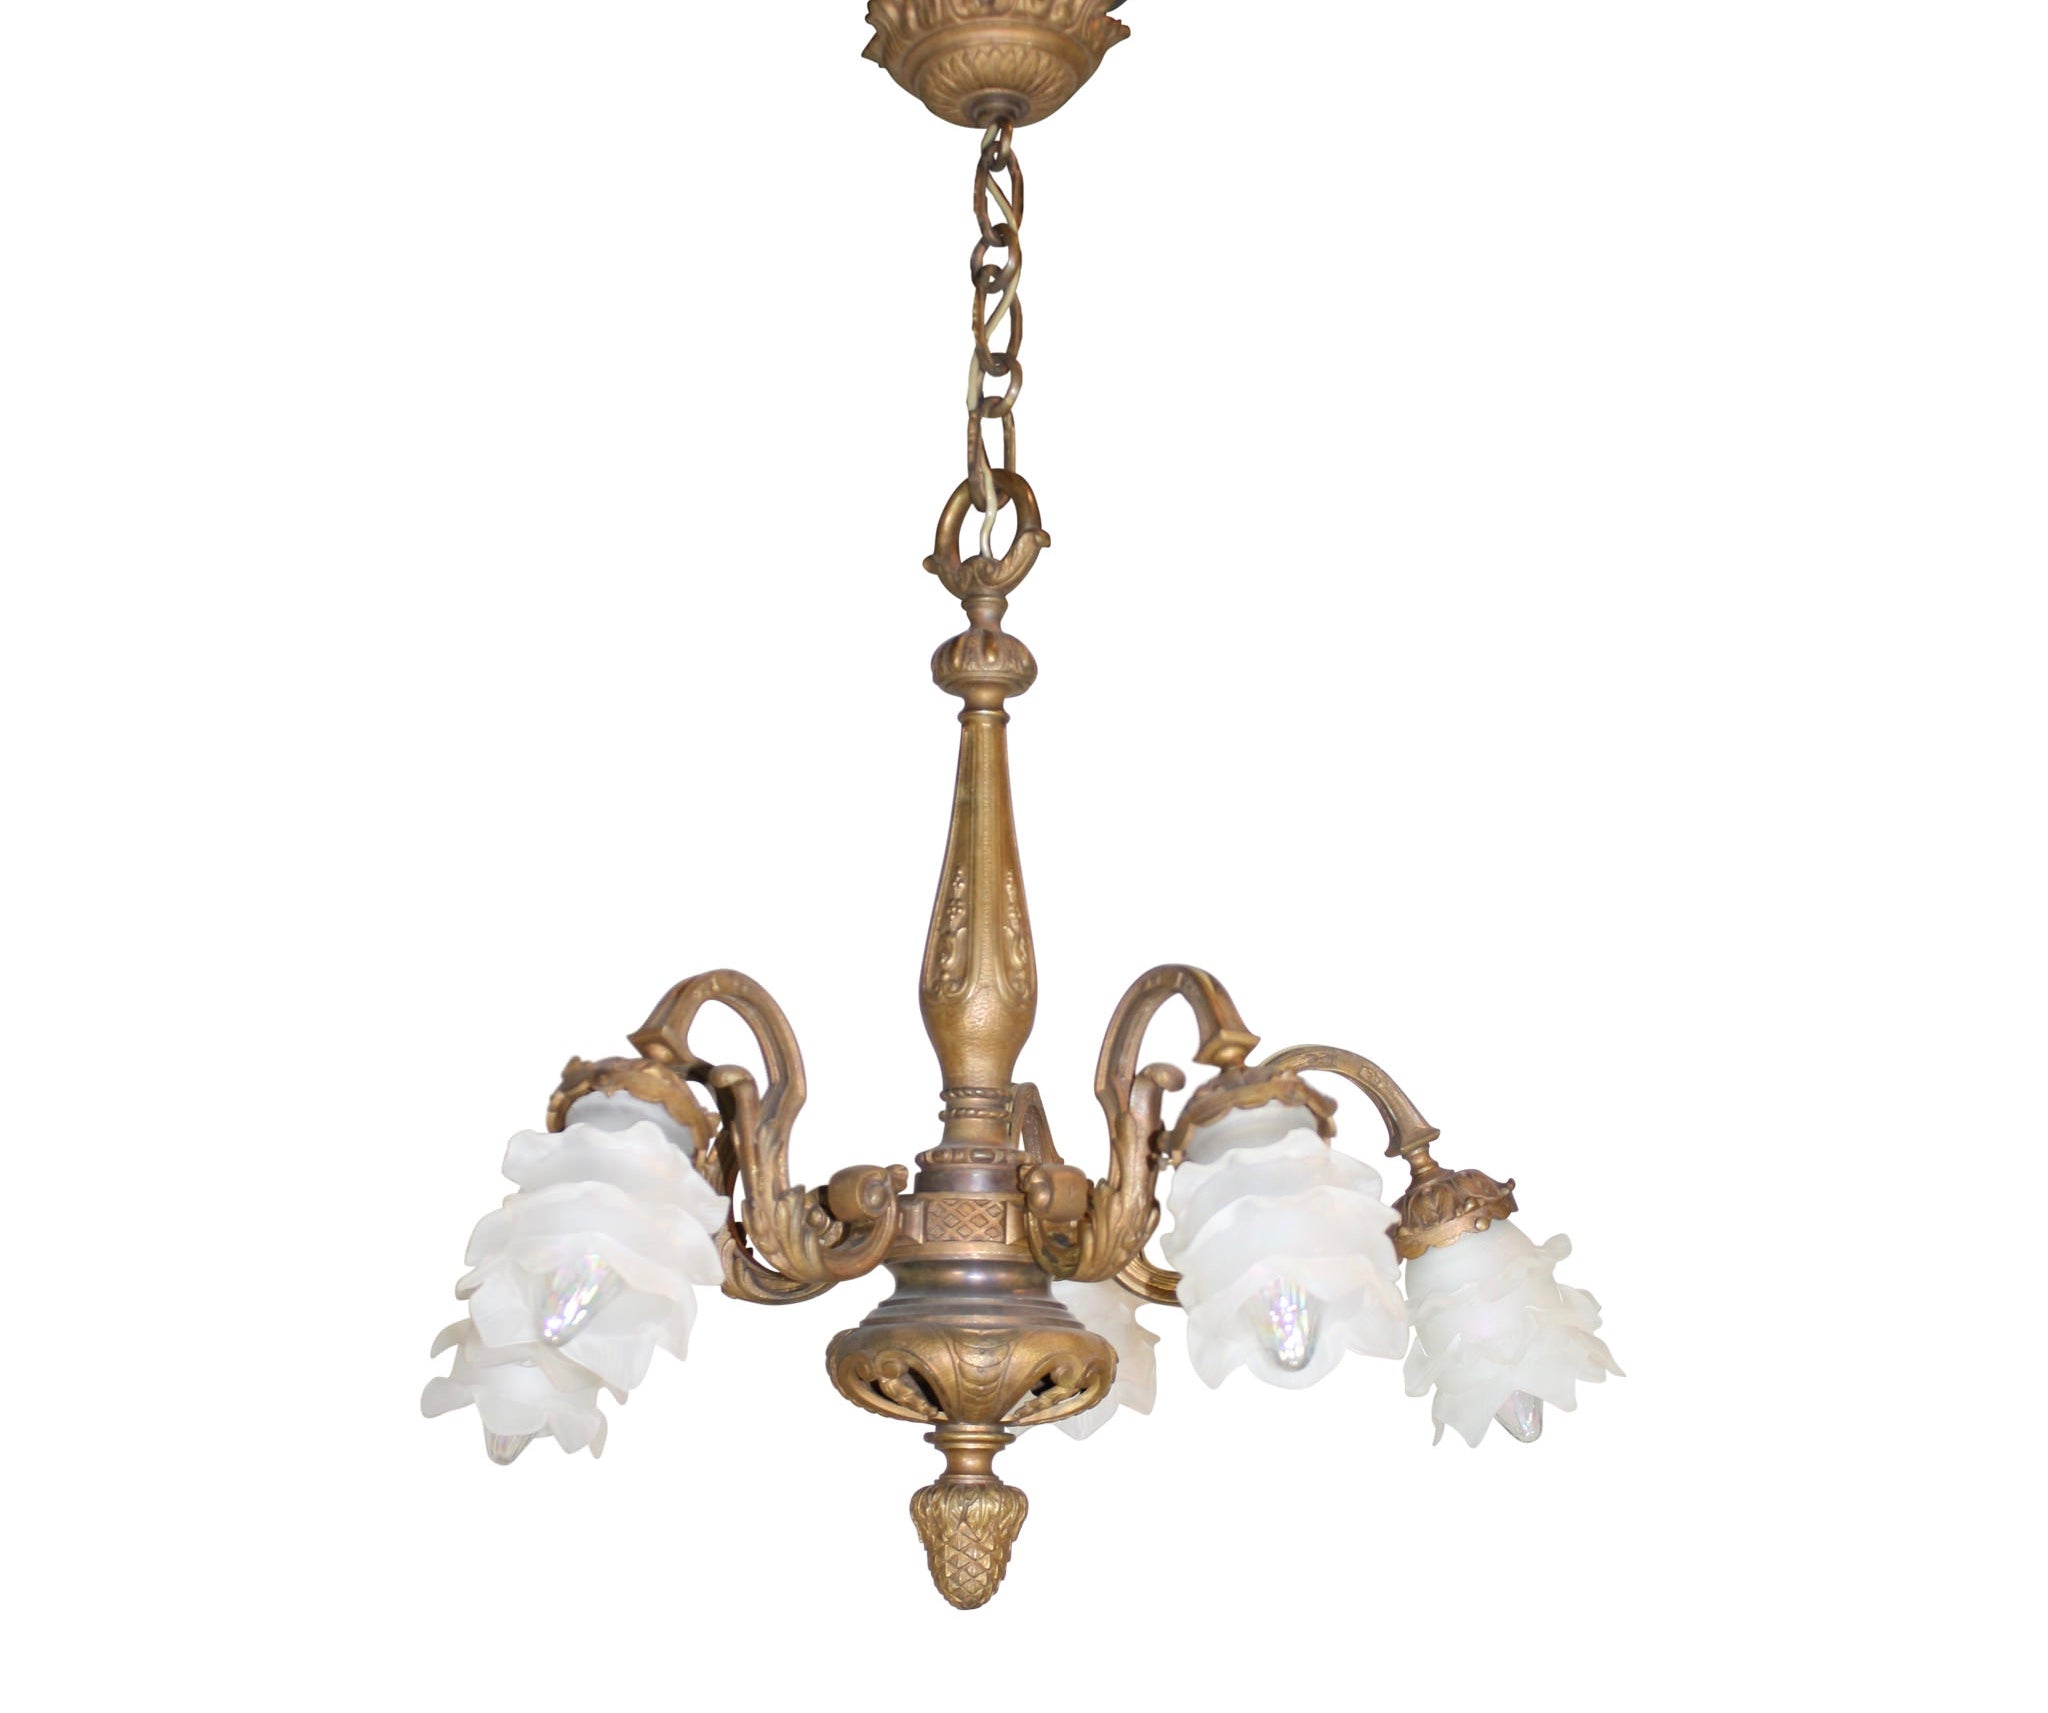 Five Arm Chandelier with Glass Shades